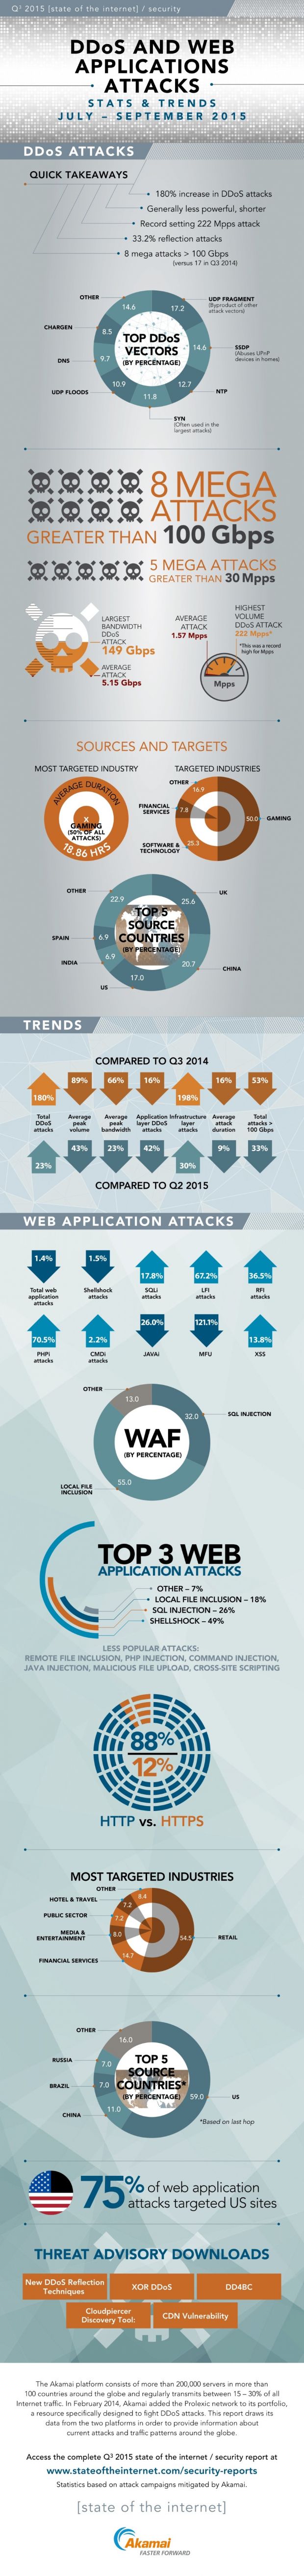 Akamai State of the Internet Security Report for Q3 2015